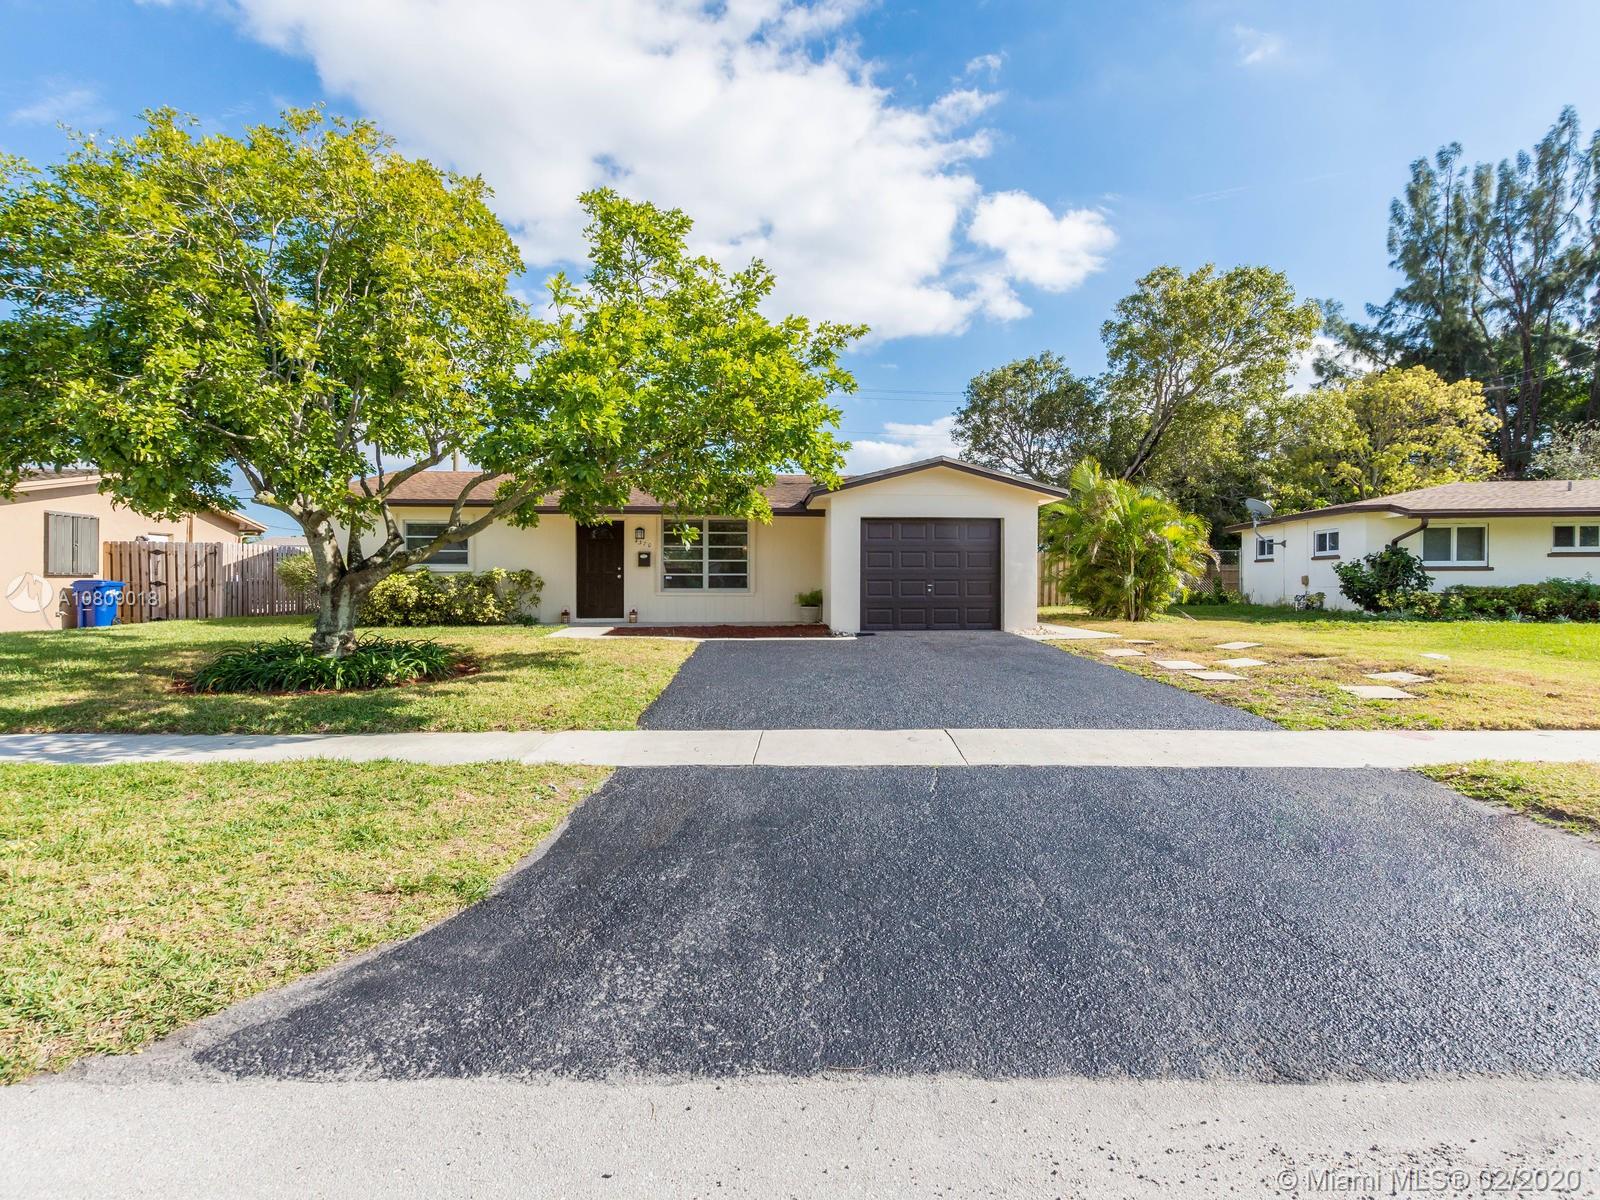 Beautiful curb appeal welcomes you to this fabulous home